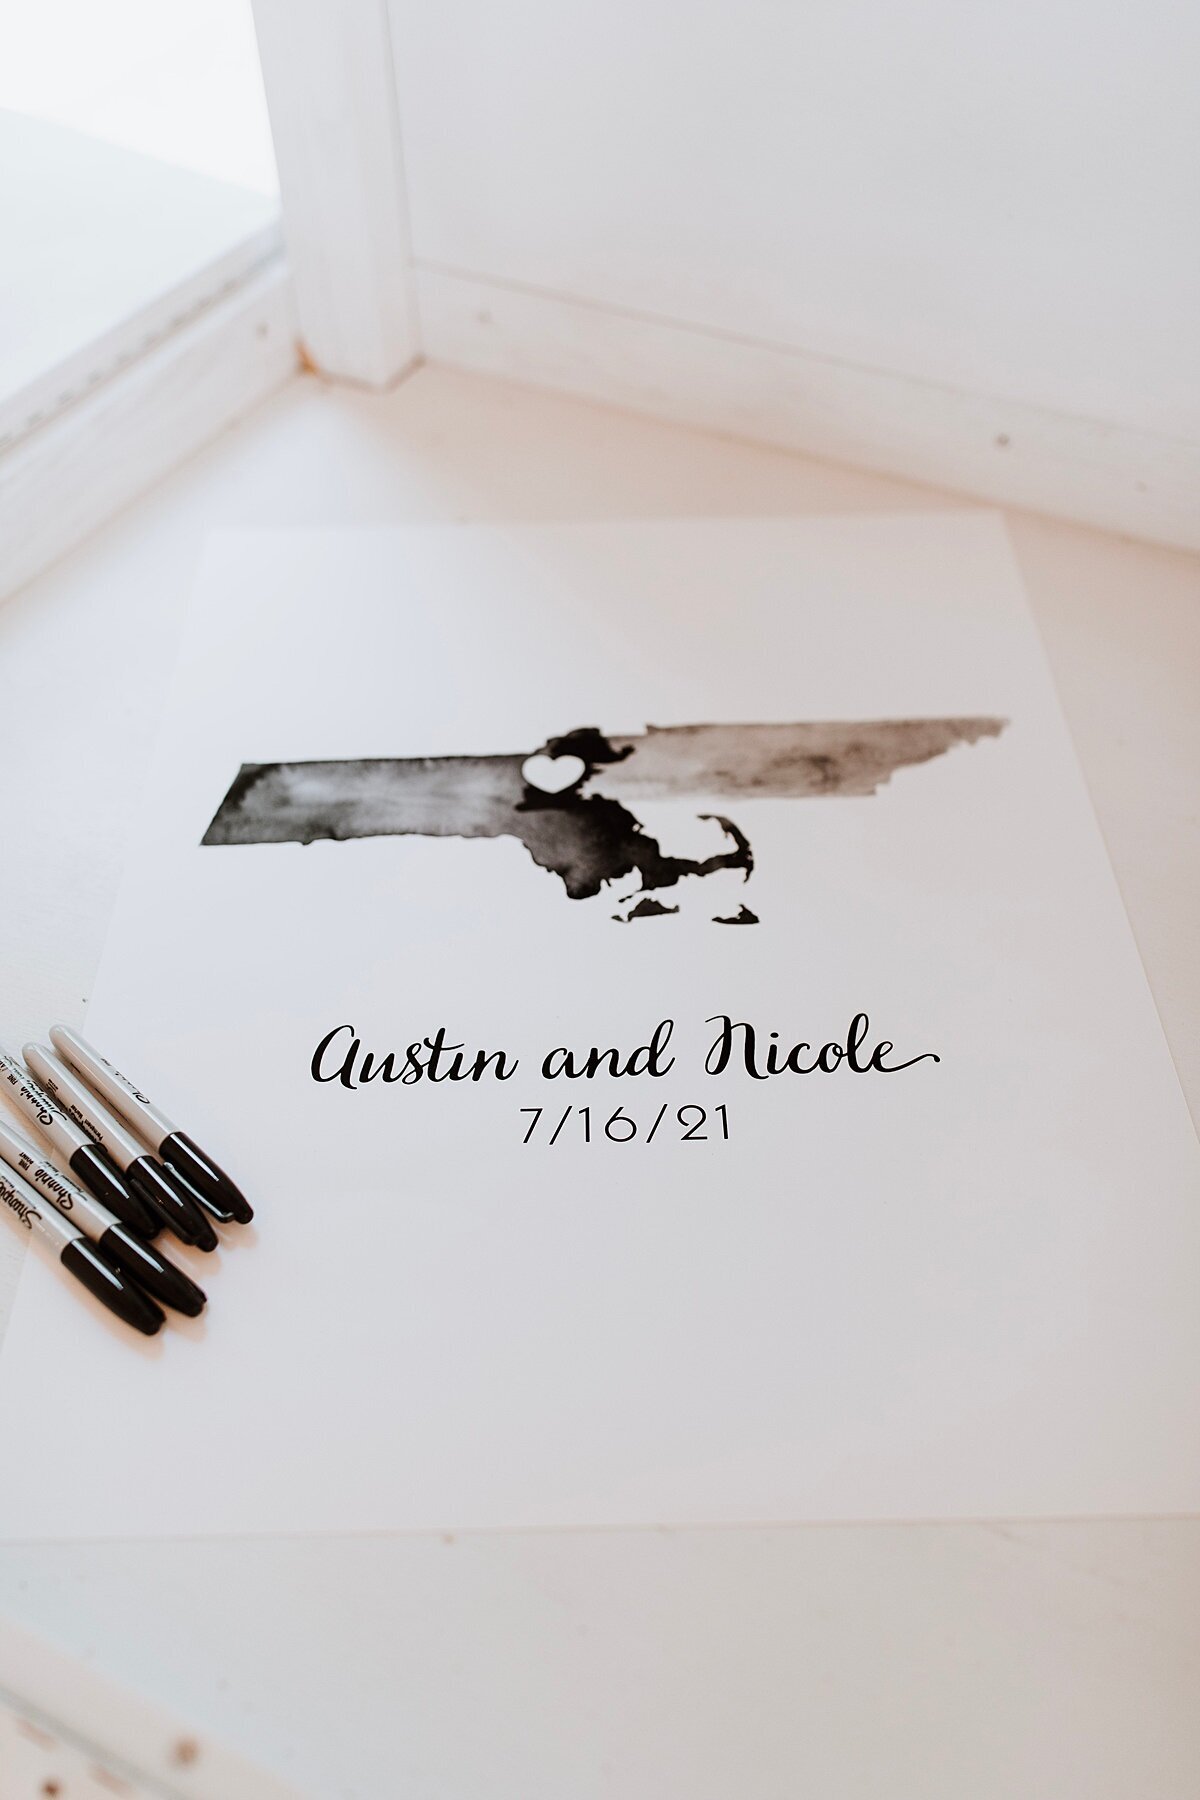 Wedding guest book with Tennessee and Massachusetts and wedding date with pens for guests to sign